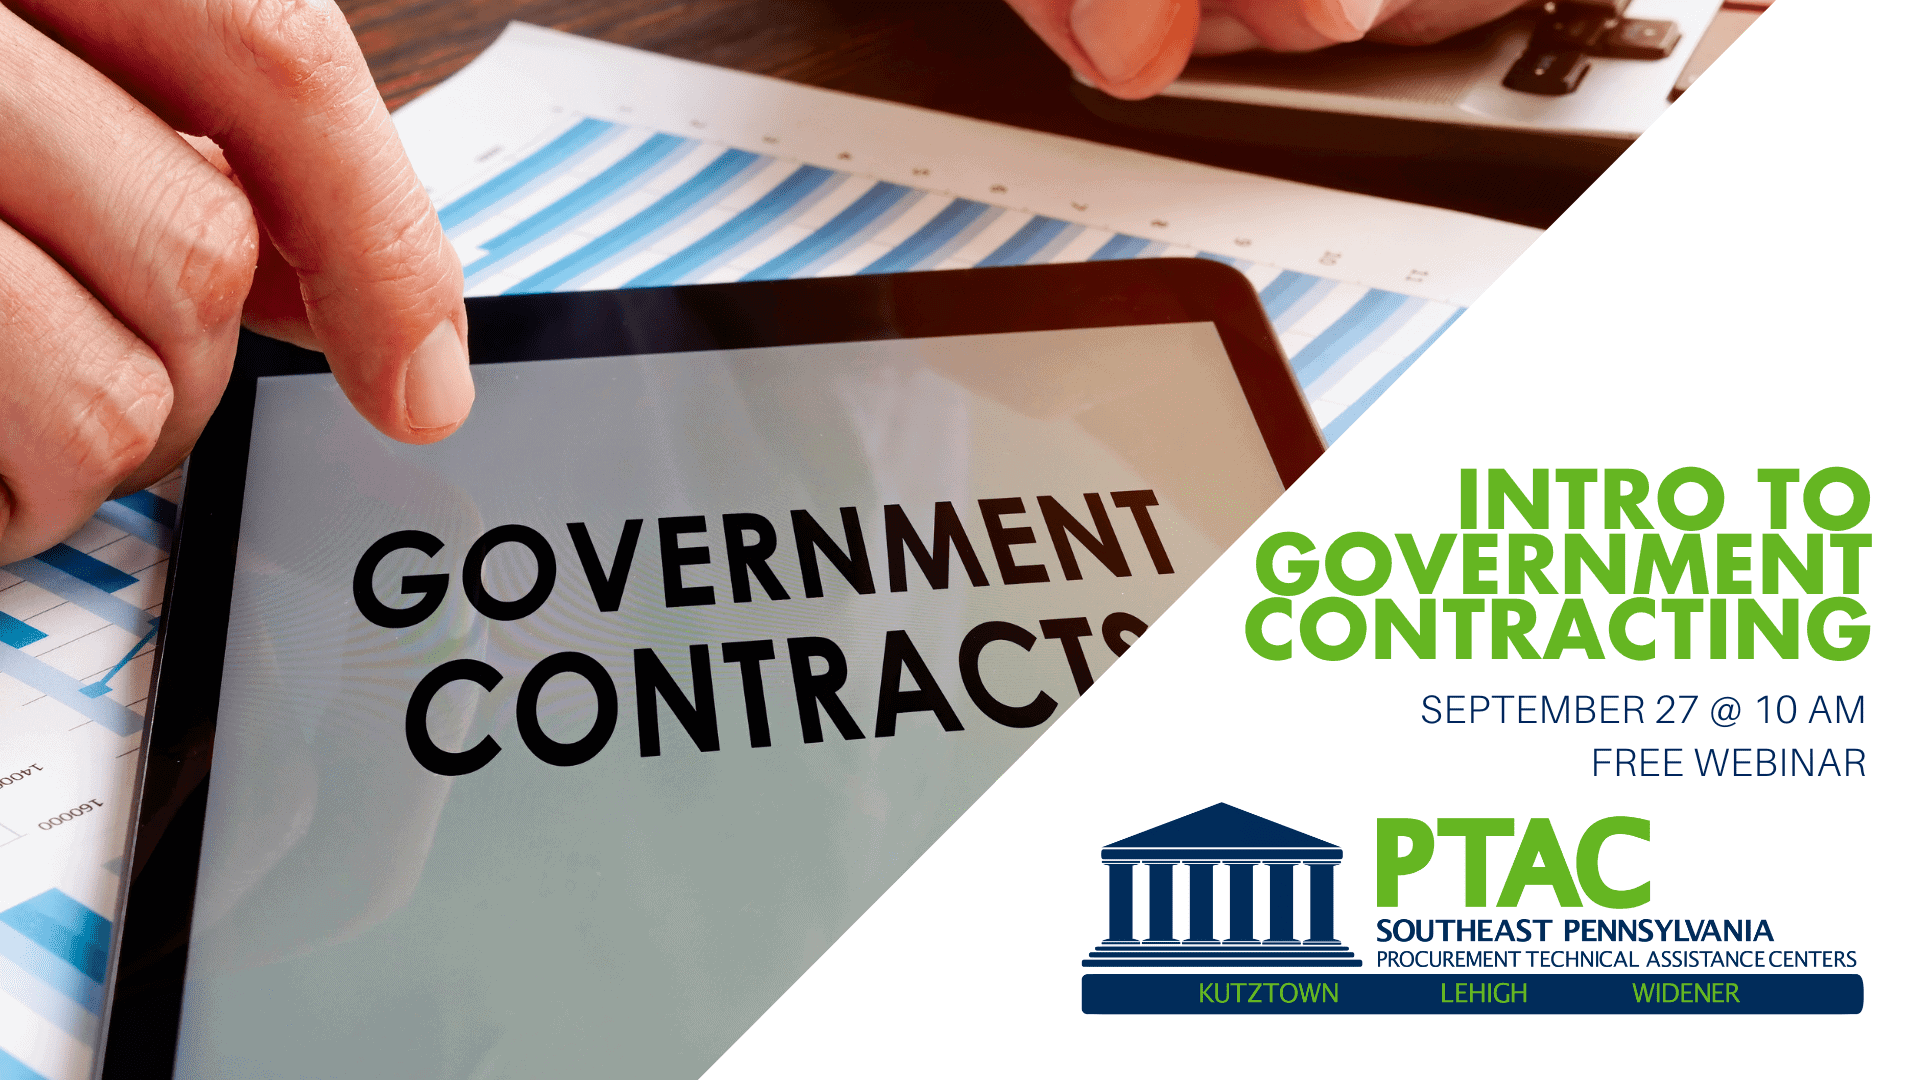 Intro. To Government Contracting